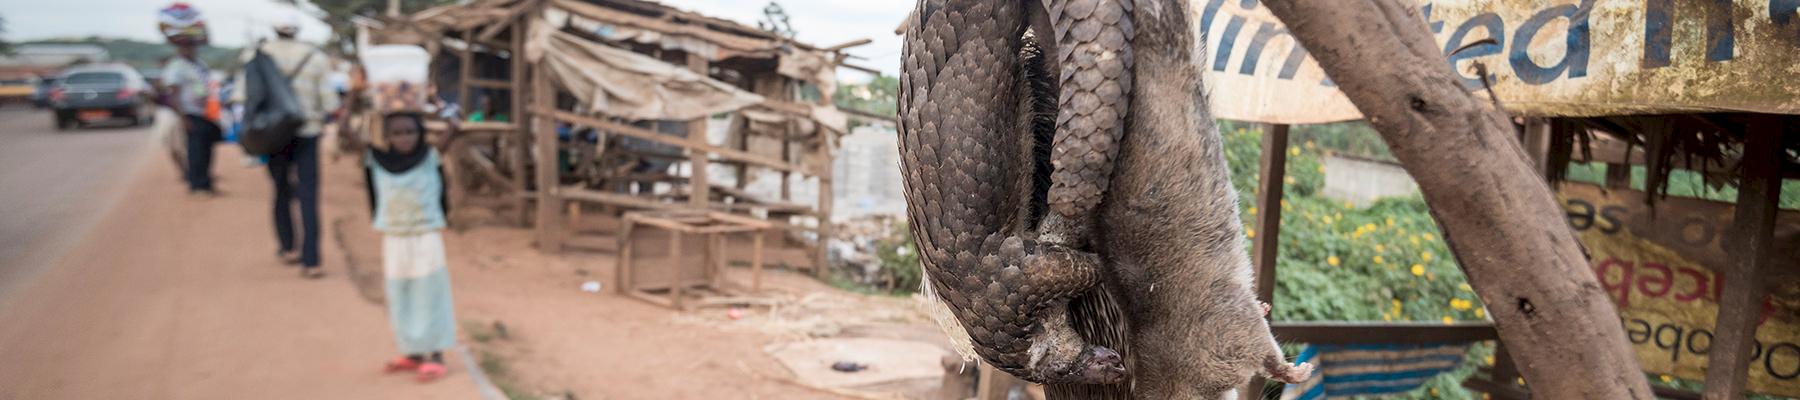 Bushmeat displayed for sale in Cameroon © A. Walmsley / TRAFFIC